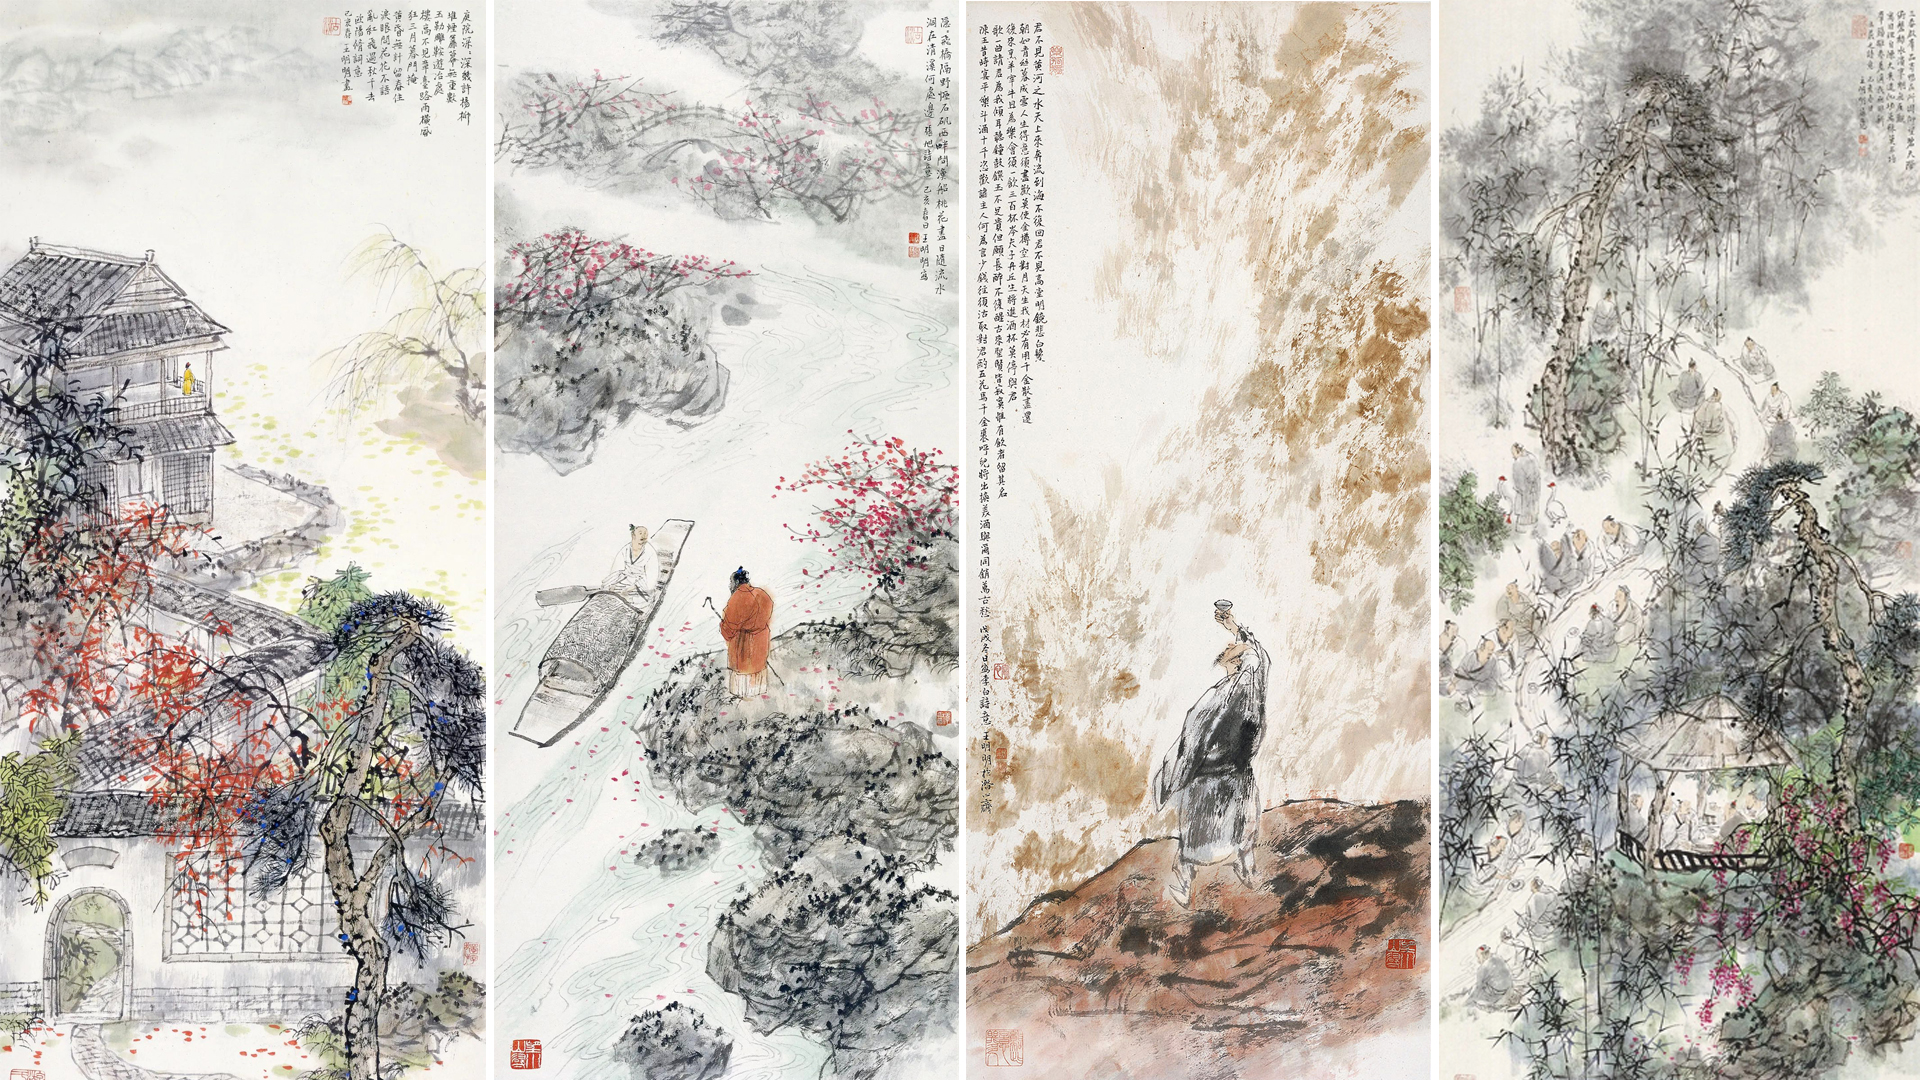 Chinese ink-wash painter presents 13-year retrospective - CGTN